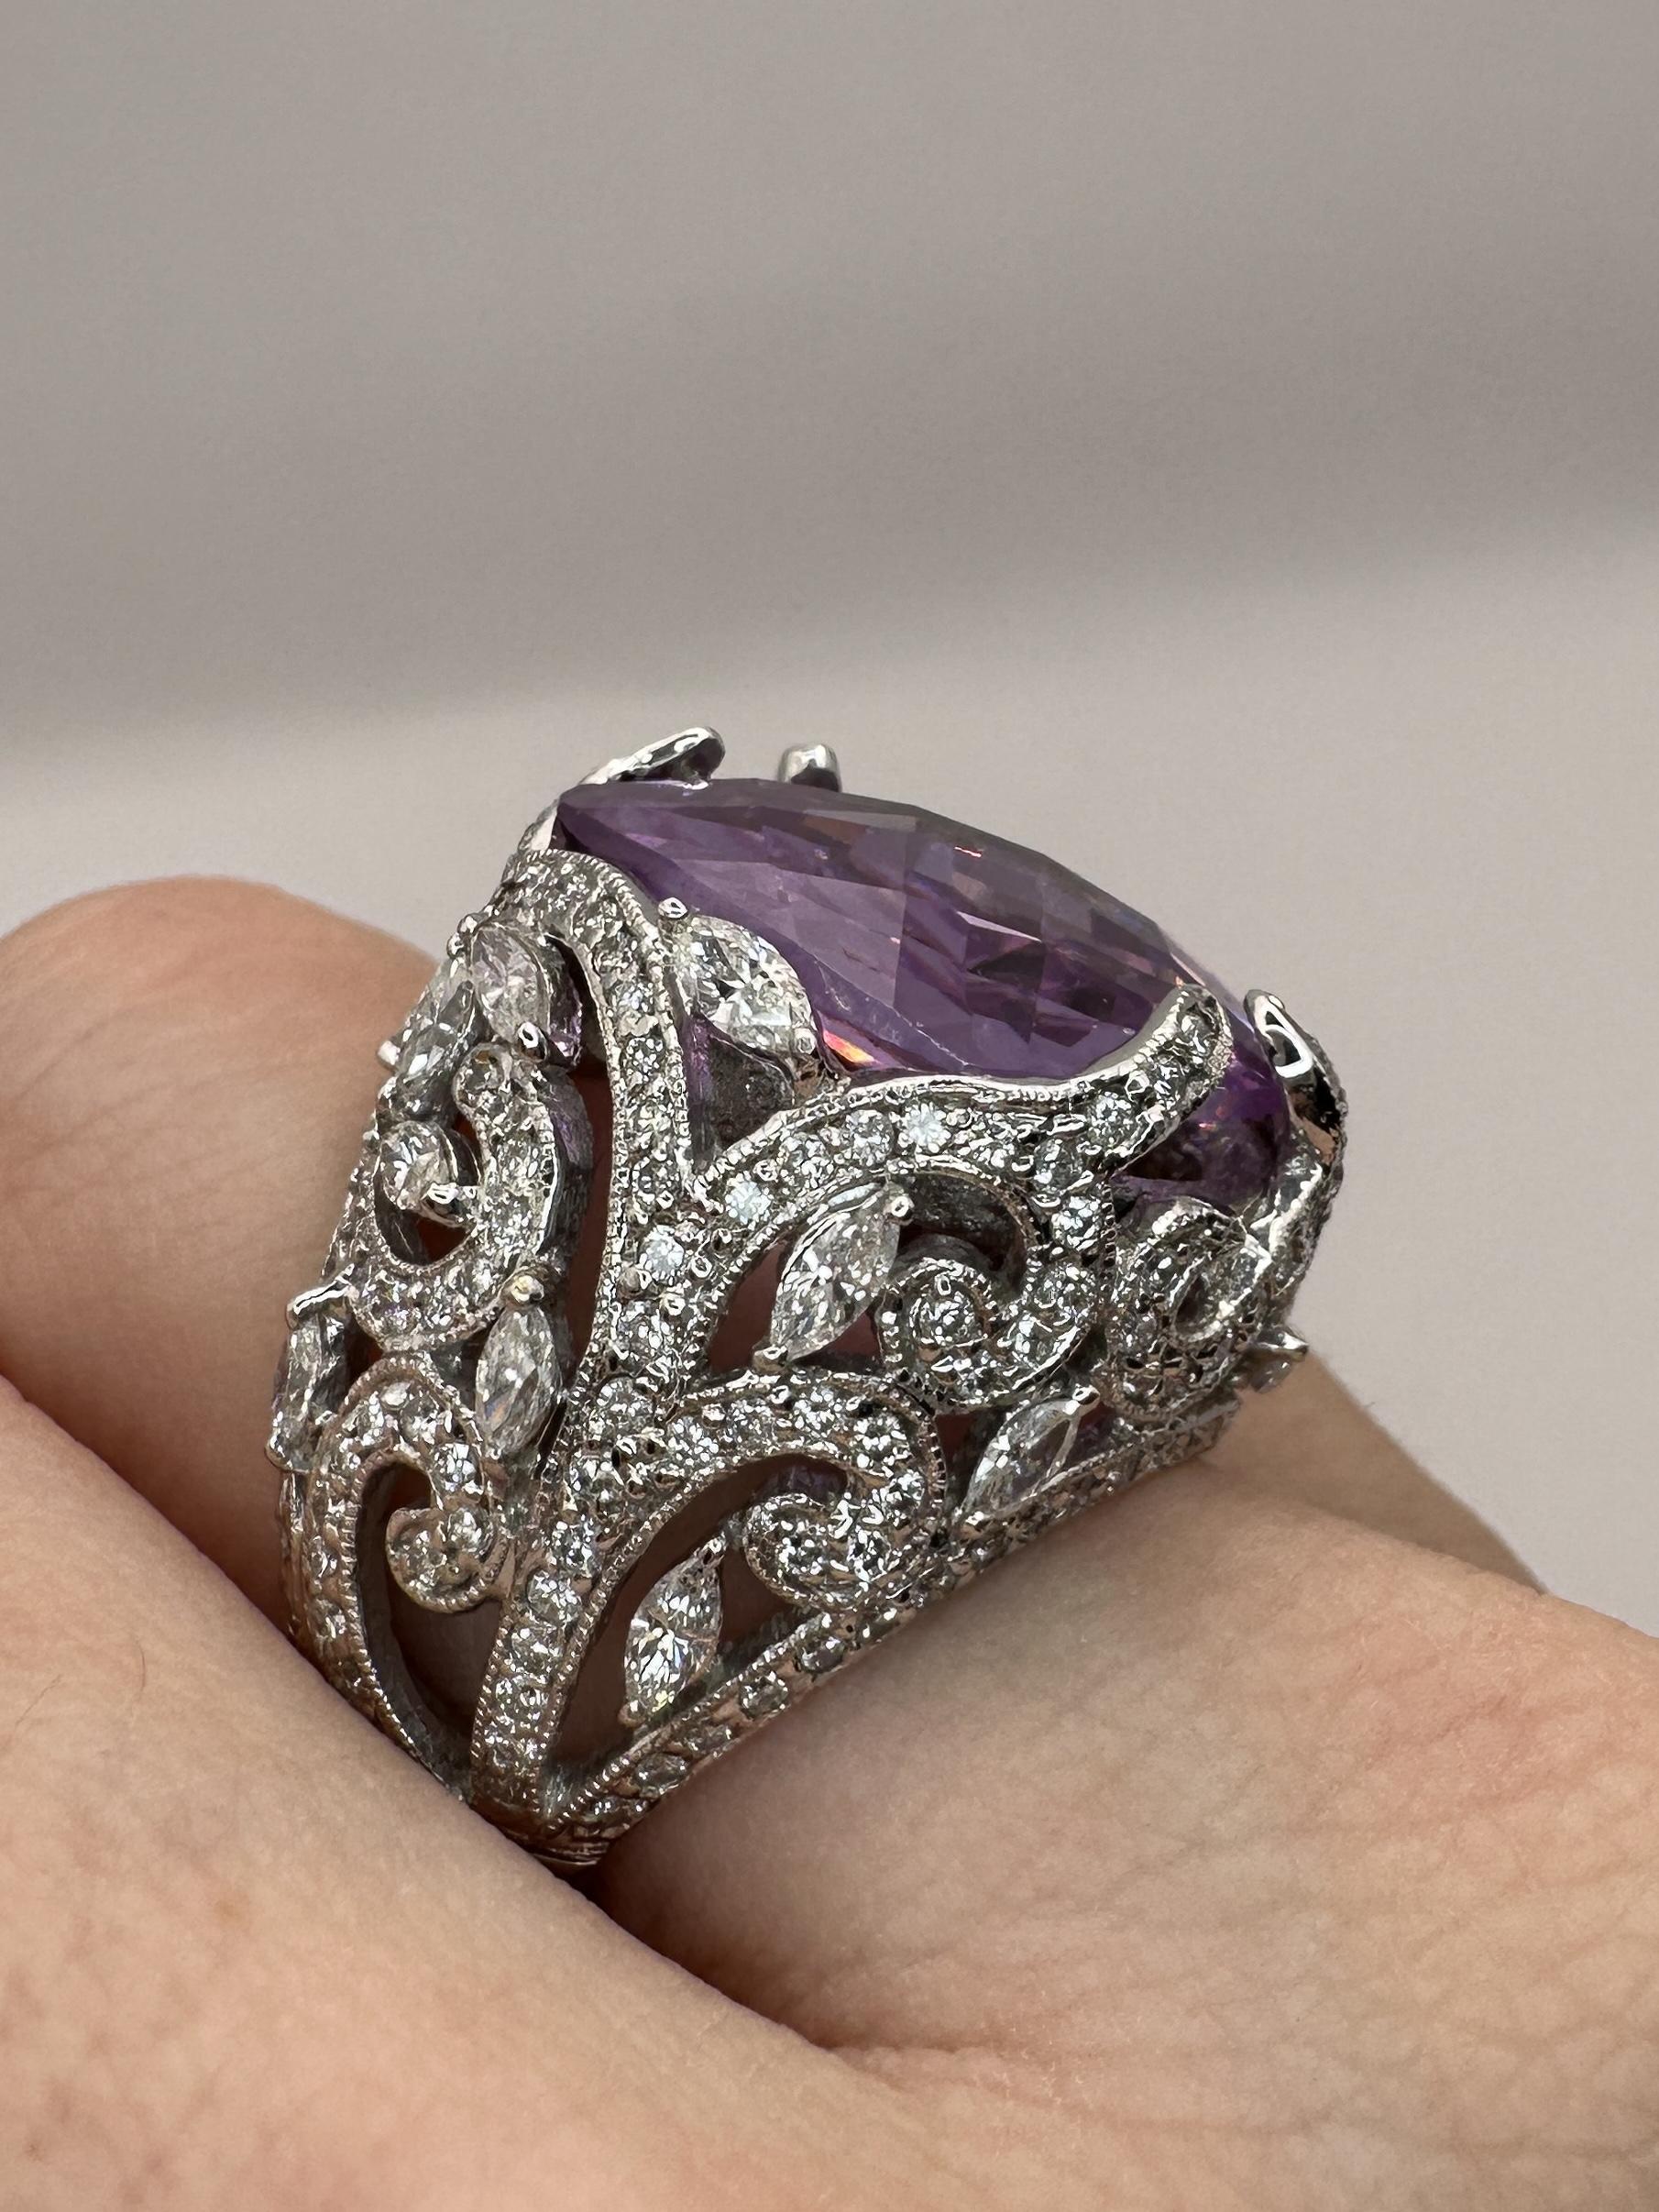 18k Diamond and Purple Stone Center Cocktail Ring For Sale 4